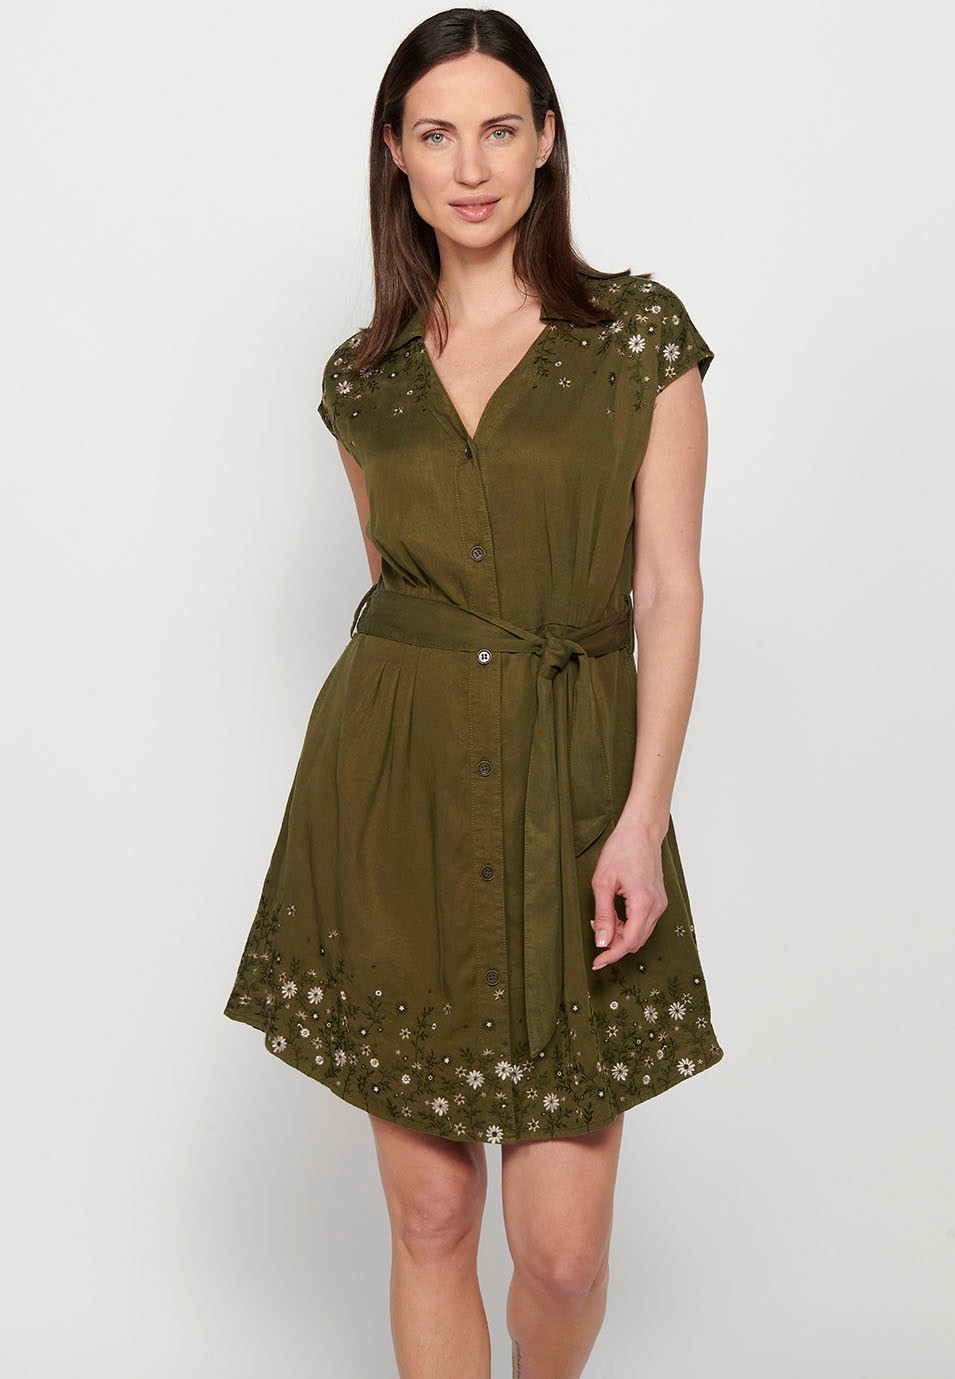 Short-sleeved midi dress with V-neckline and front button closure, fitted at the waist with embroidered details in Khaki color for Women 2